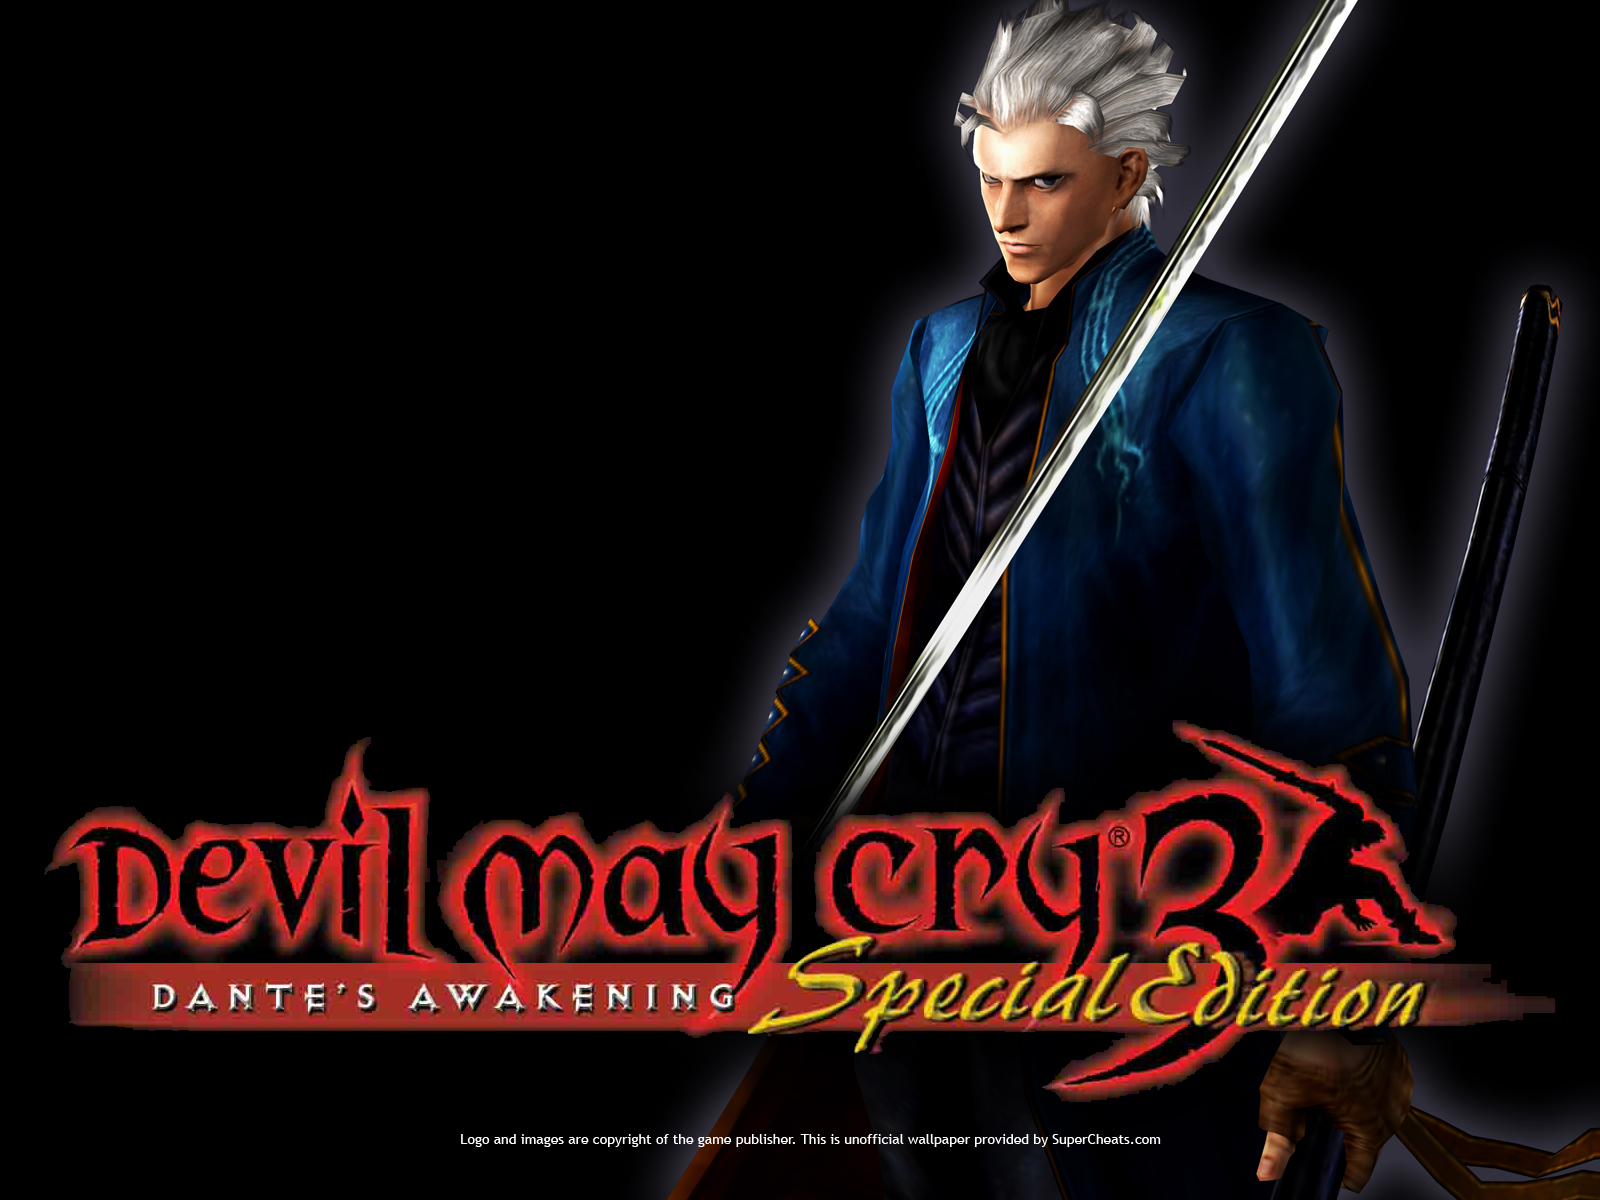 Devil+may+cry+3+special+edition+wallpaper